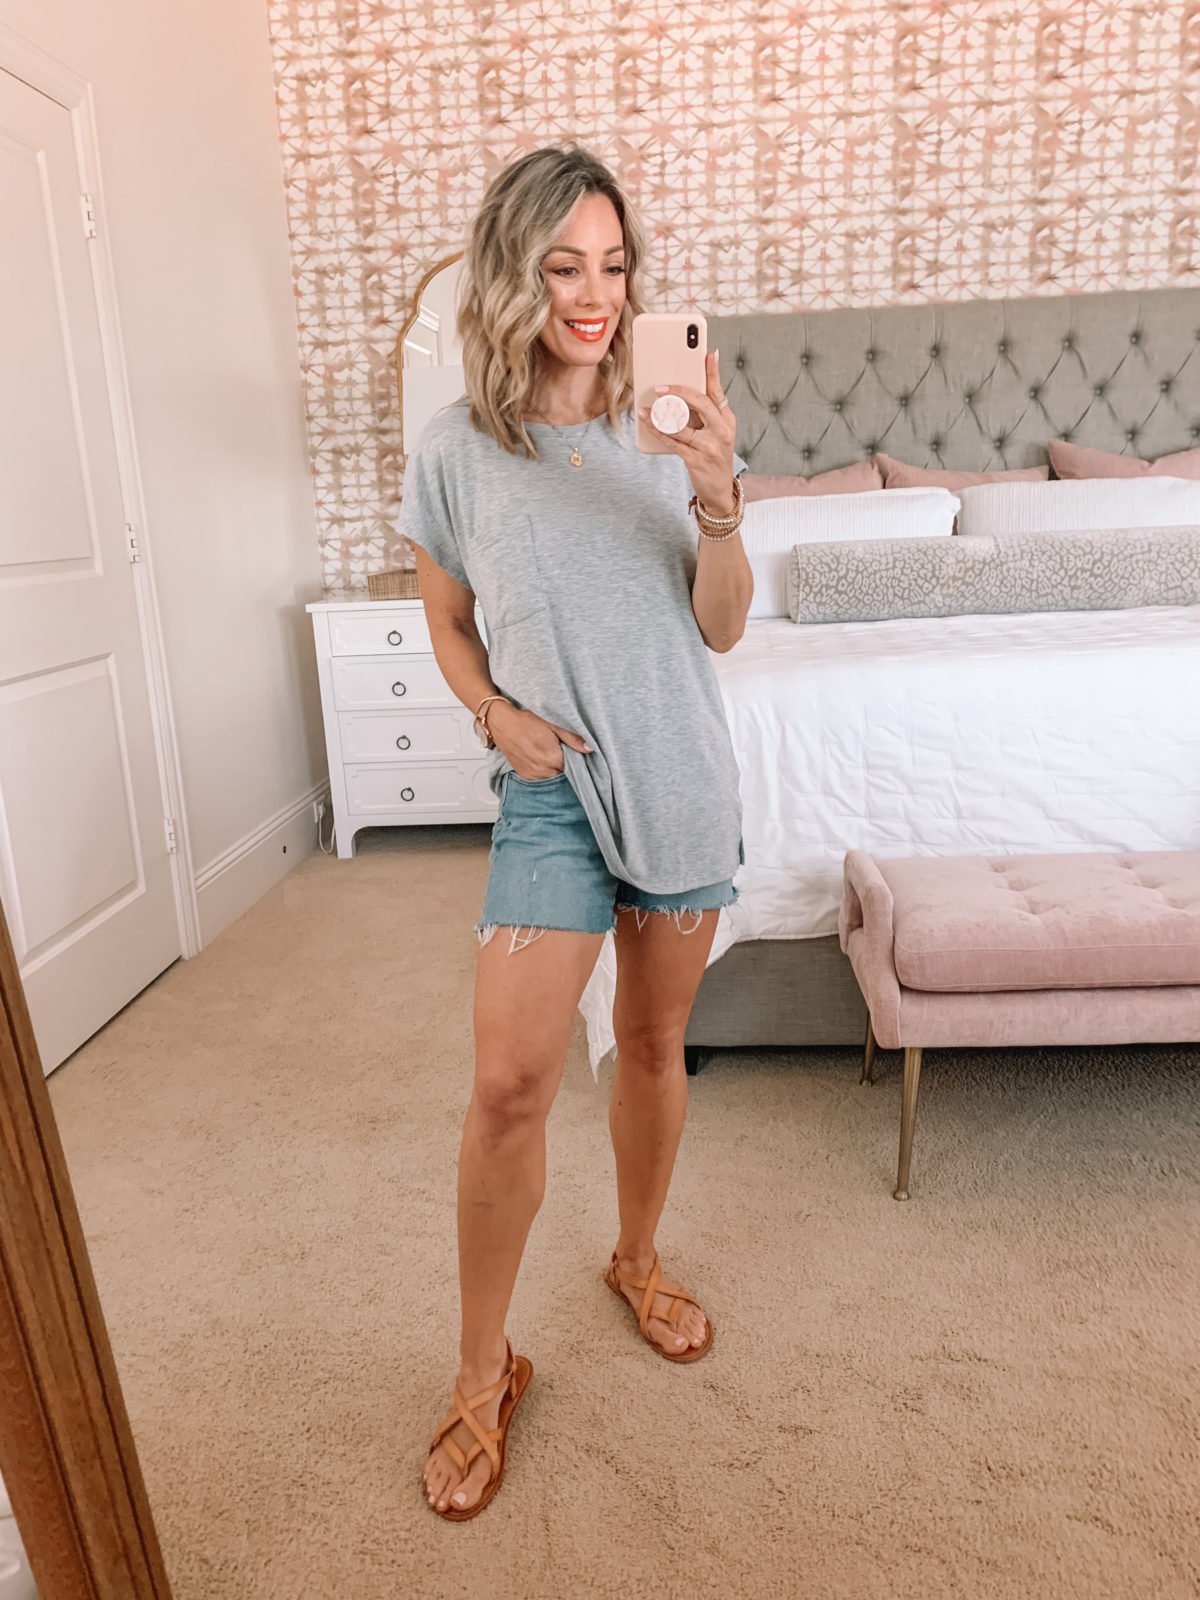 Amazon Fashion Faves, Grey Cap Sleeve Tee and Denim Shorts with Sandals 